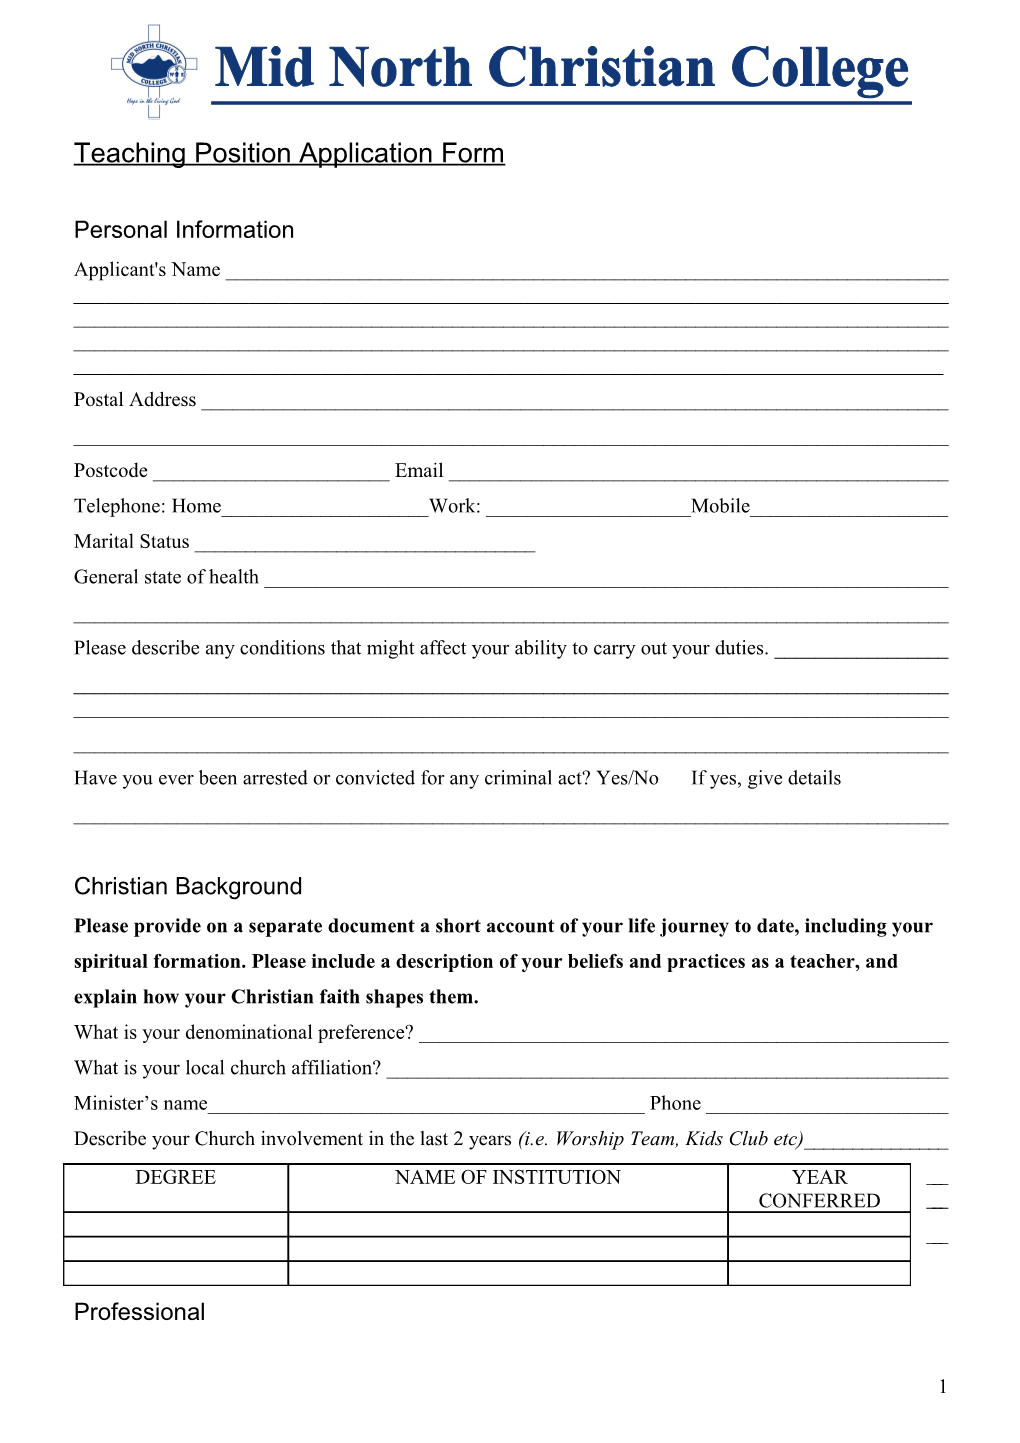 Teaching Position Application Form